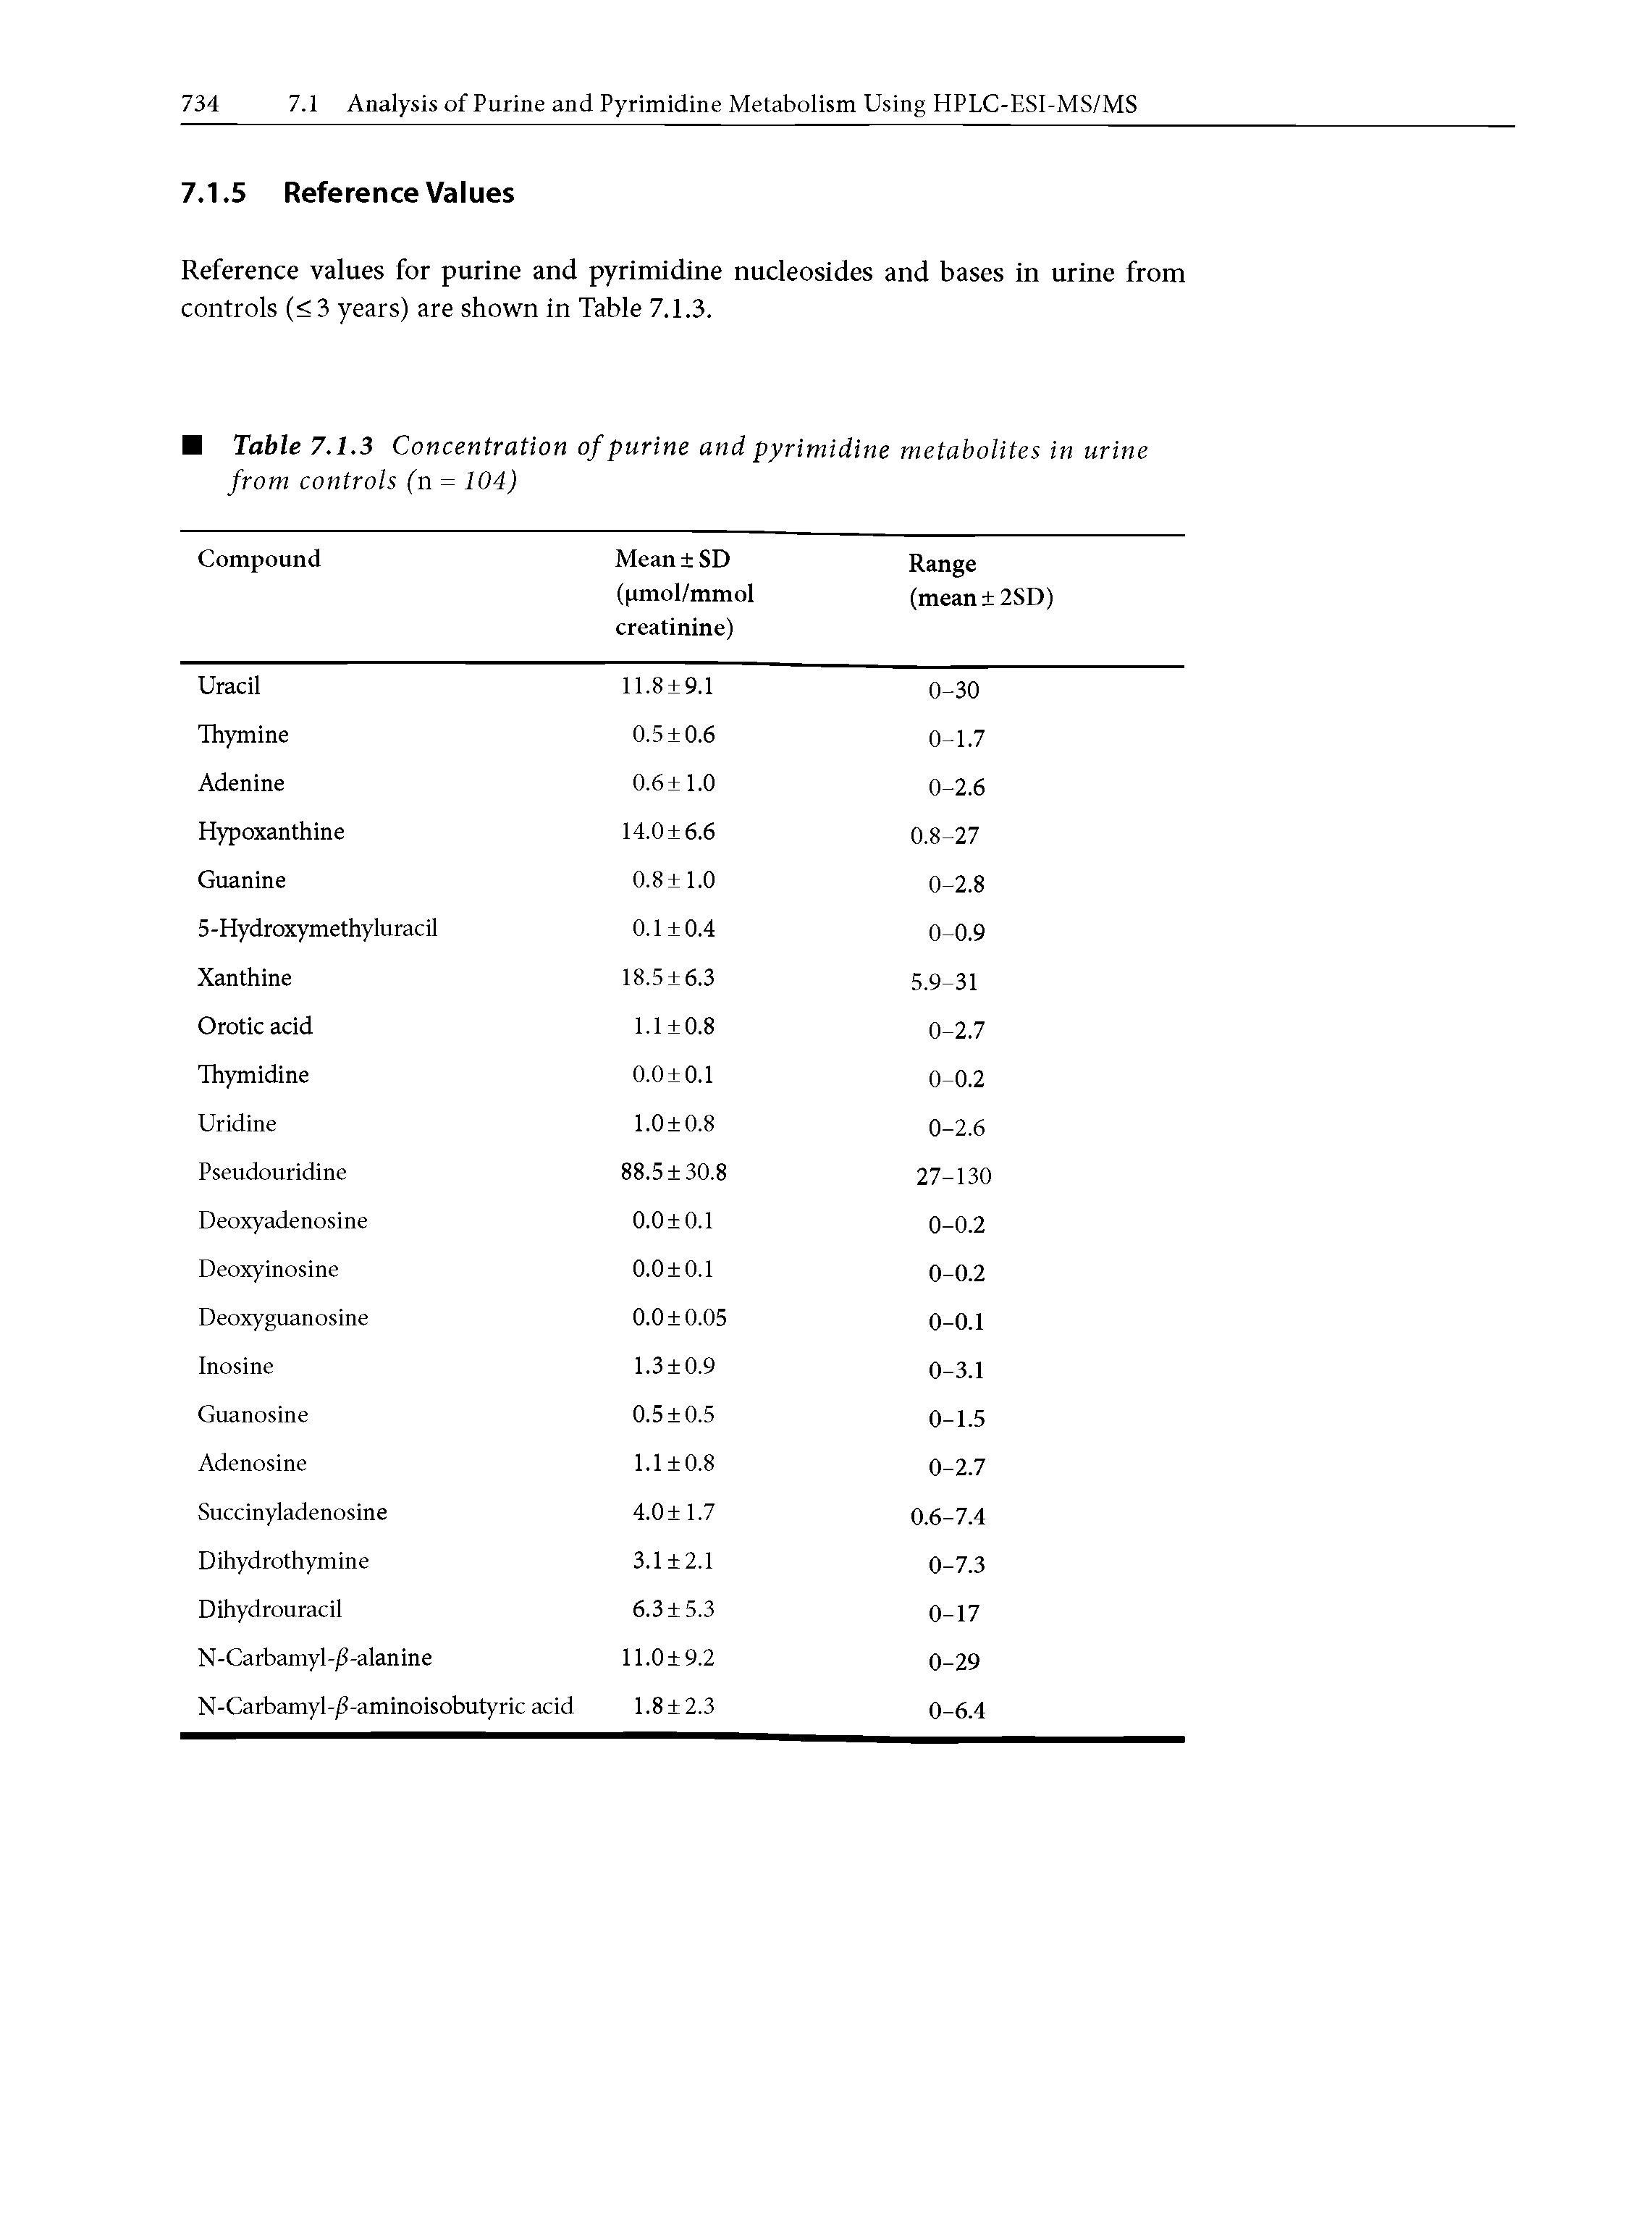 Table 7.1.3 Concentration of purine and pyrimidine metabolites in urine from controls (n = 104)...